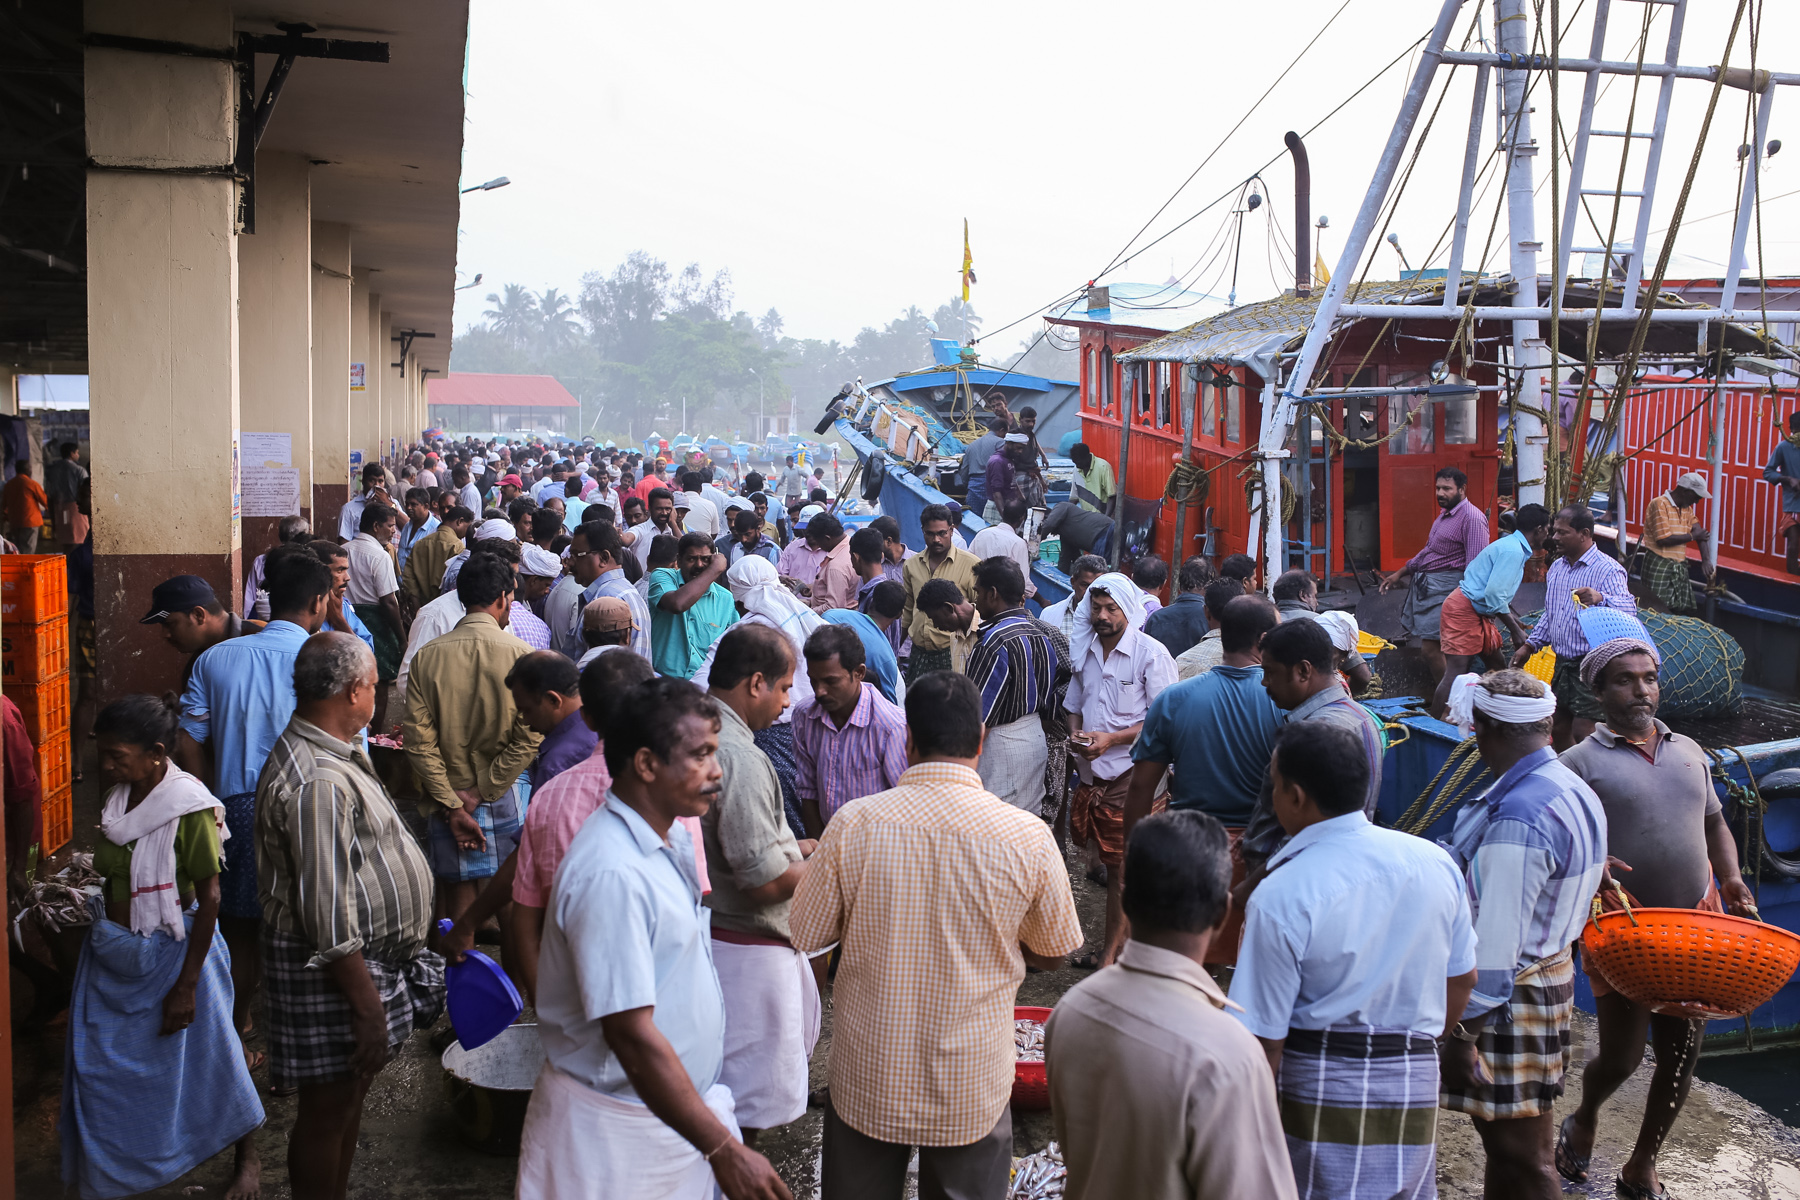 The Usual Busy-Ness - Every single day at Neendakara Harbour is filled with these crowd, bidding the price, loading the fishes and getting back home, with the desire to do a better tomorrow.